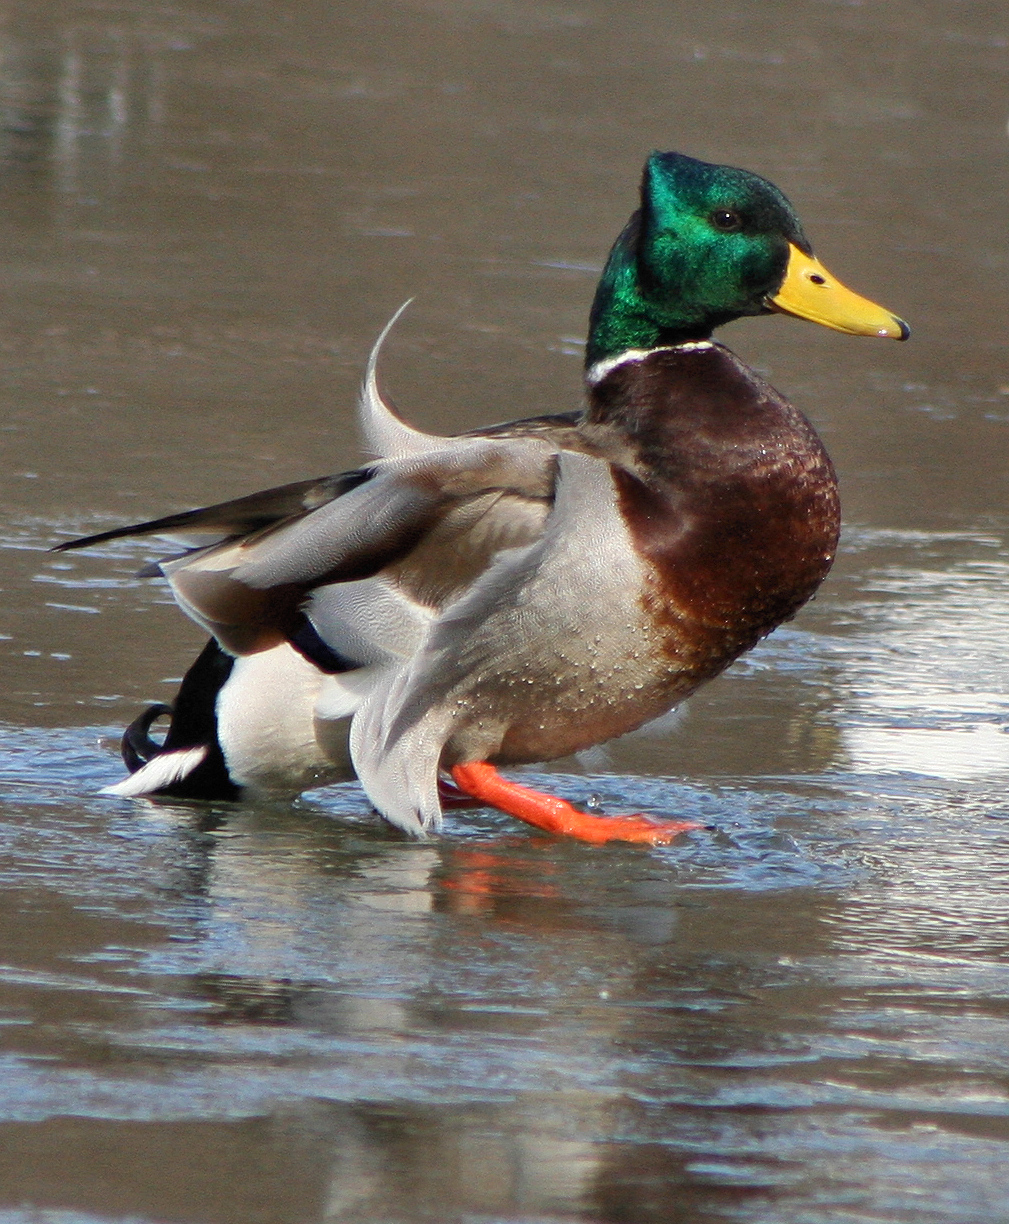 the duck is standing on water while looking forward